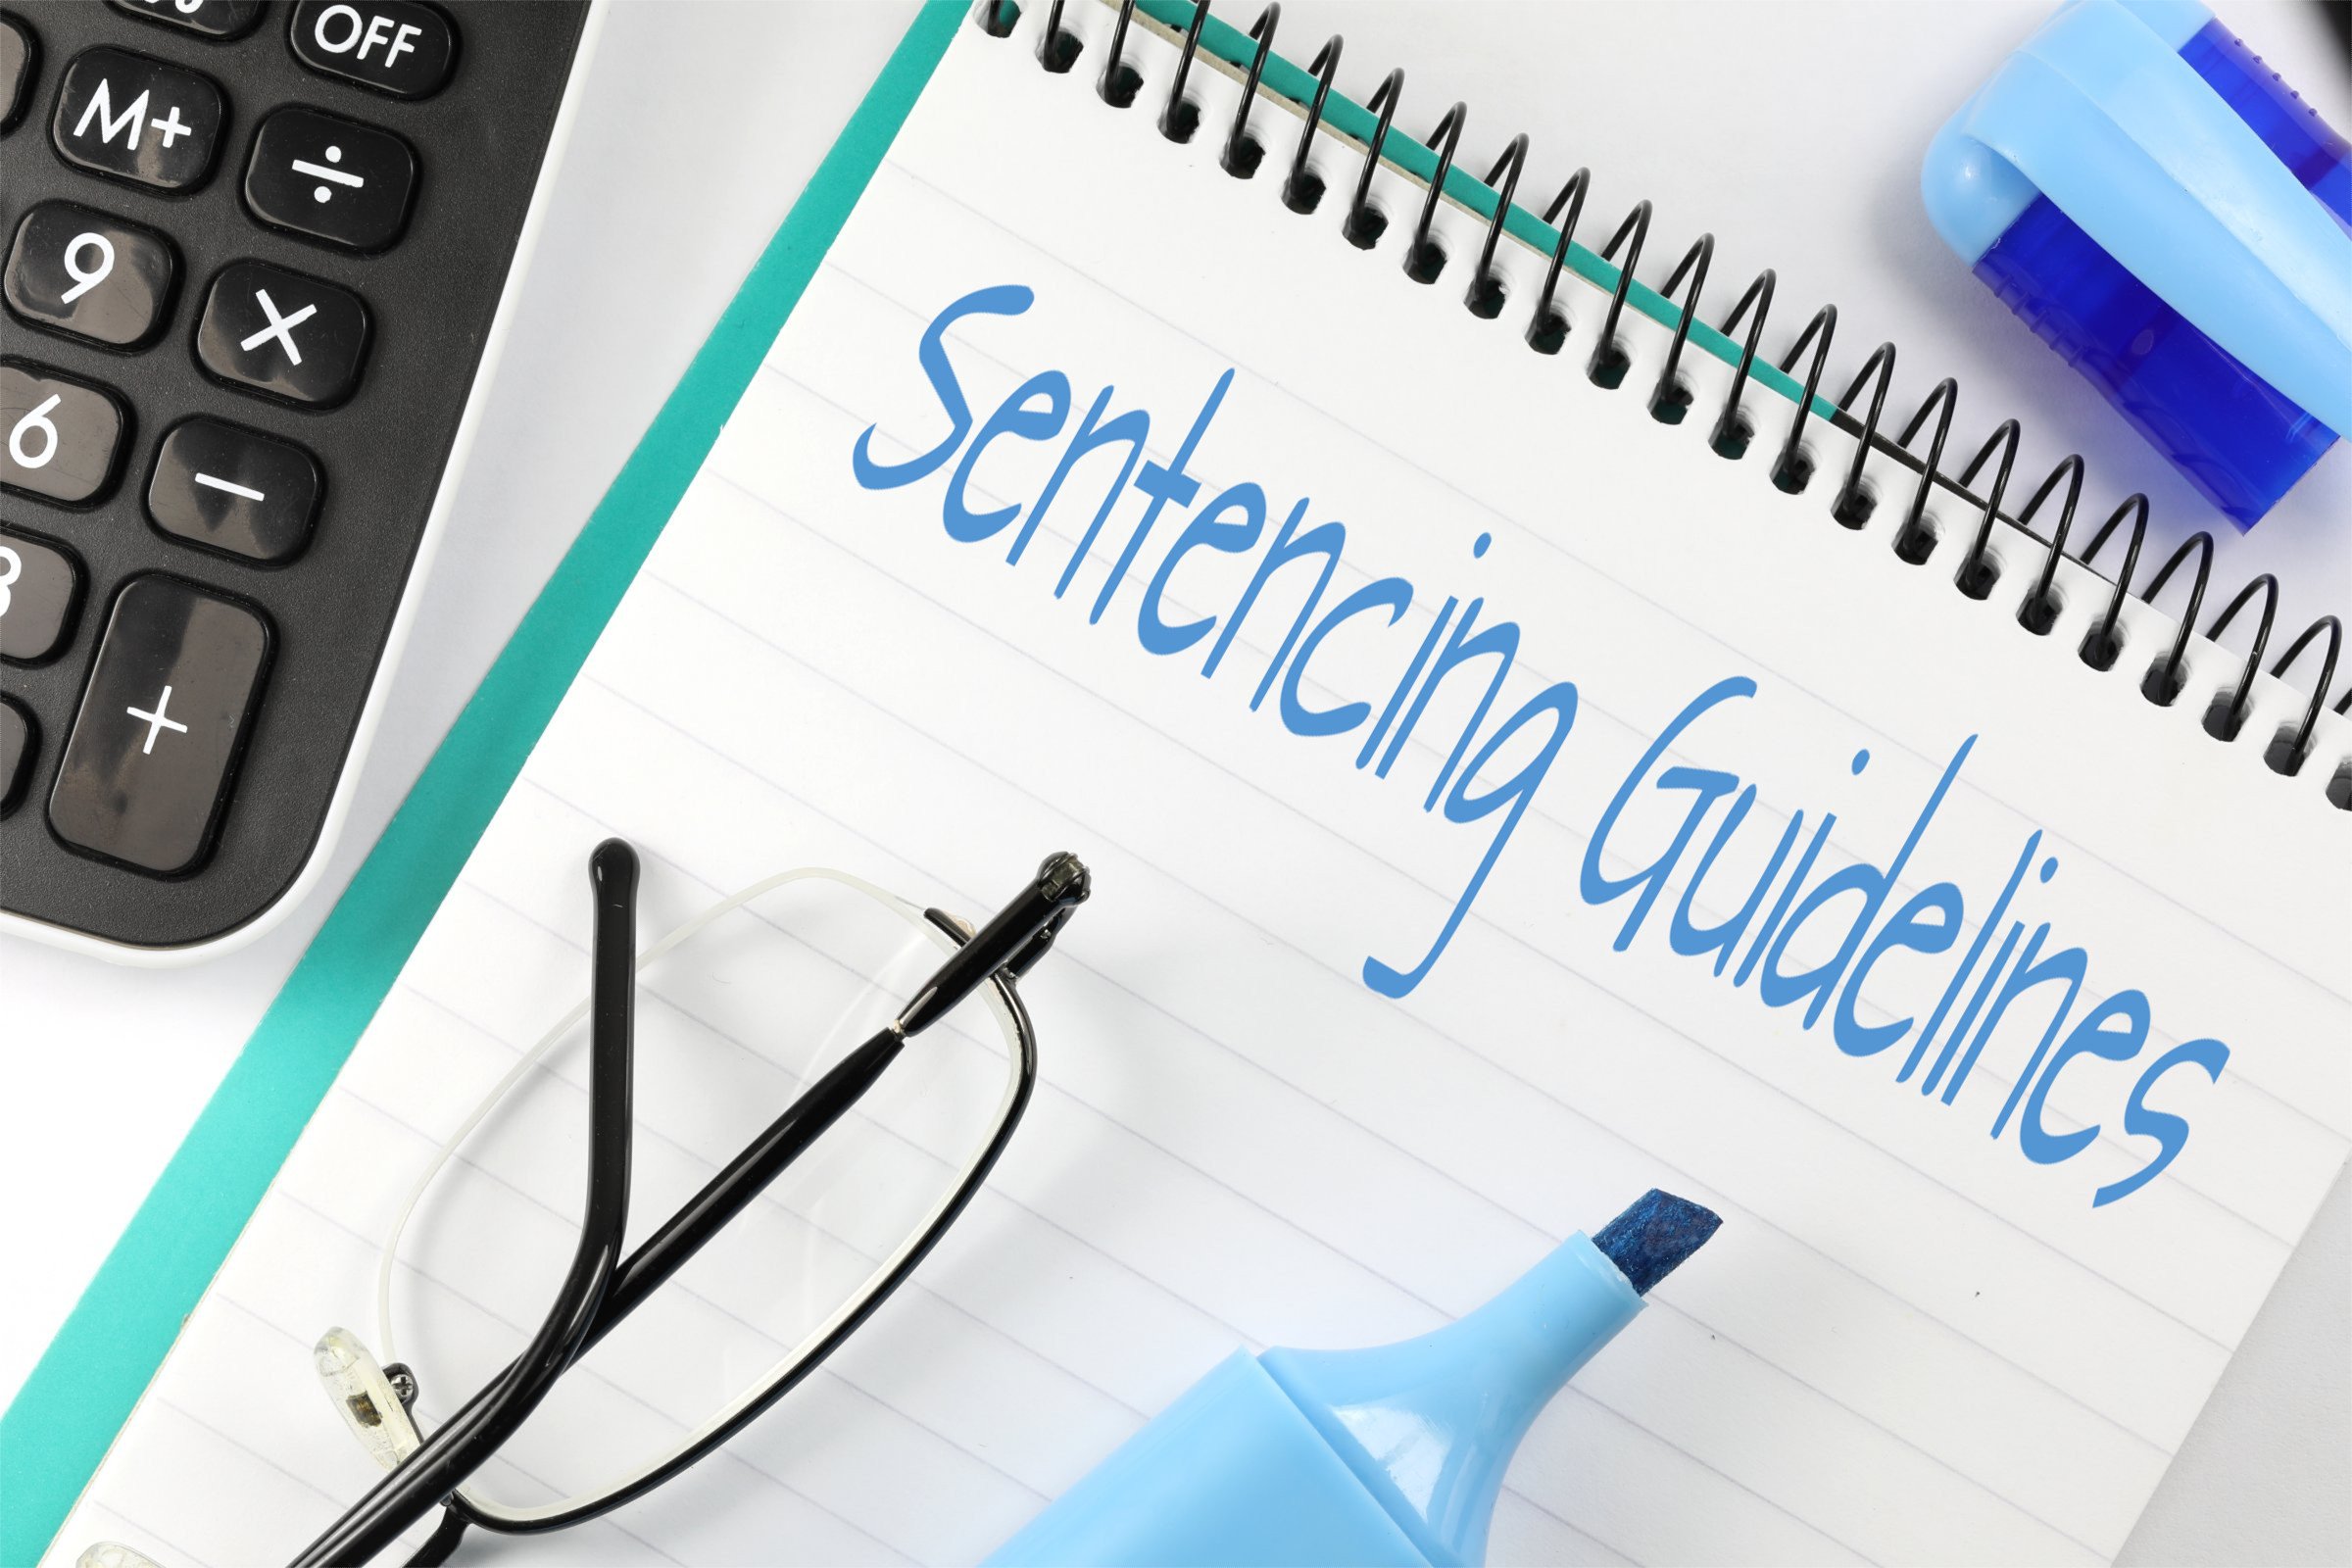 free-of-charge-creative-commons-sentencing-guidelines-image-notepad-1